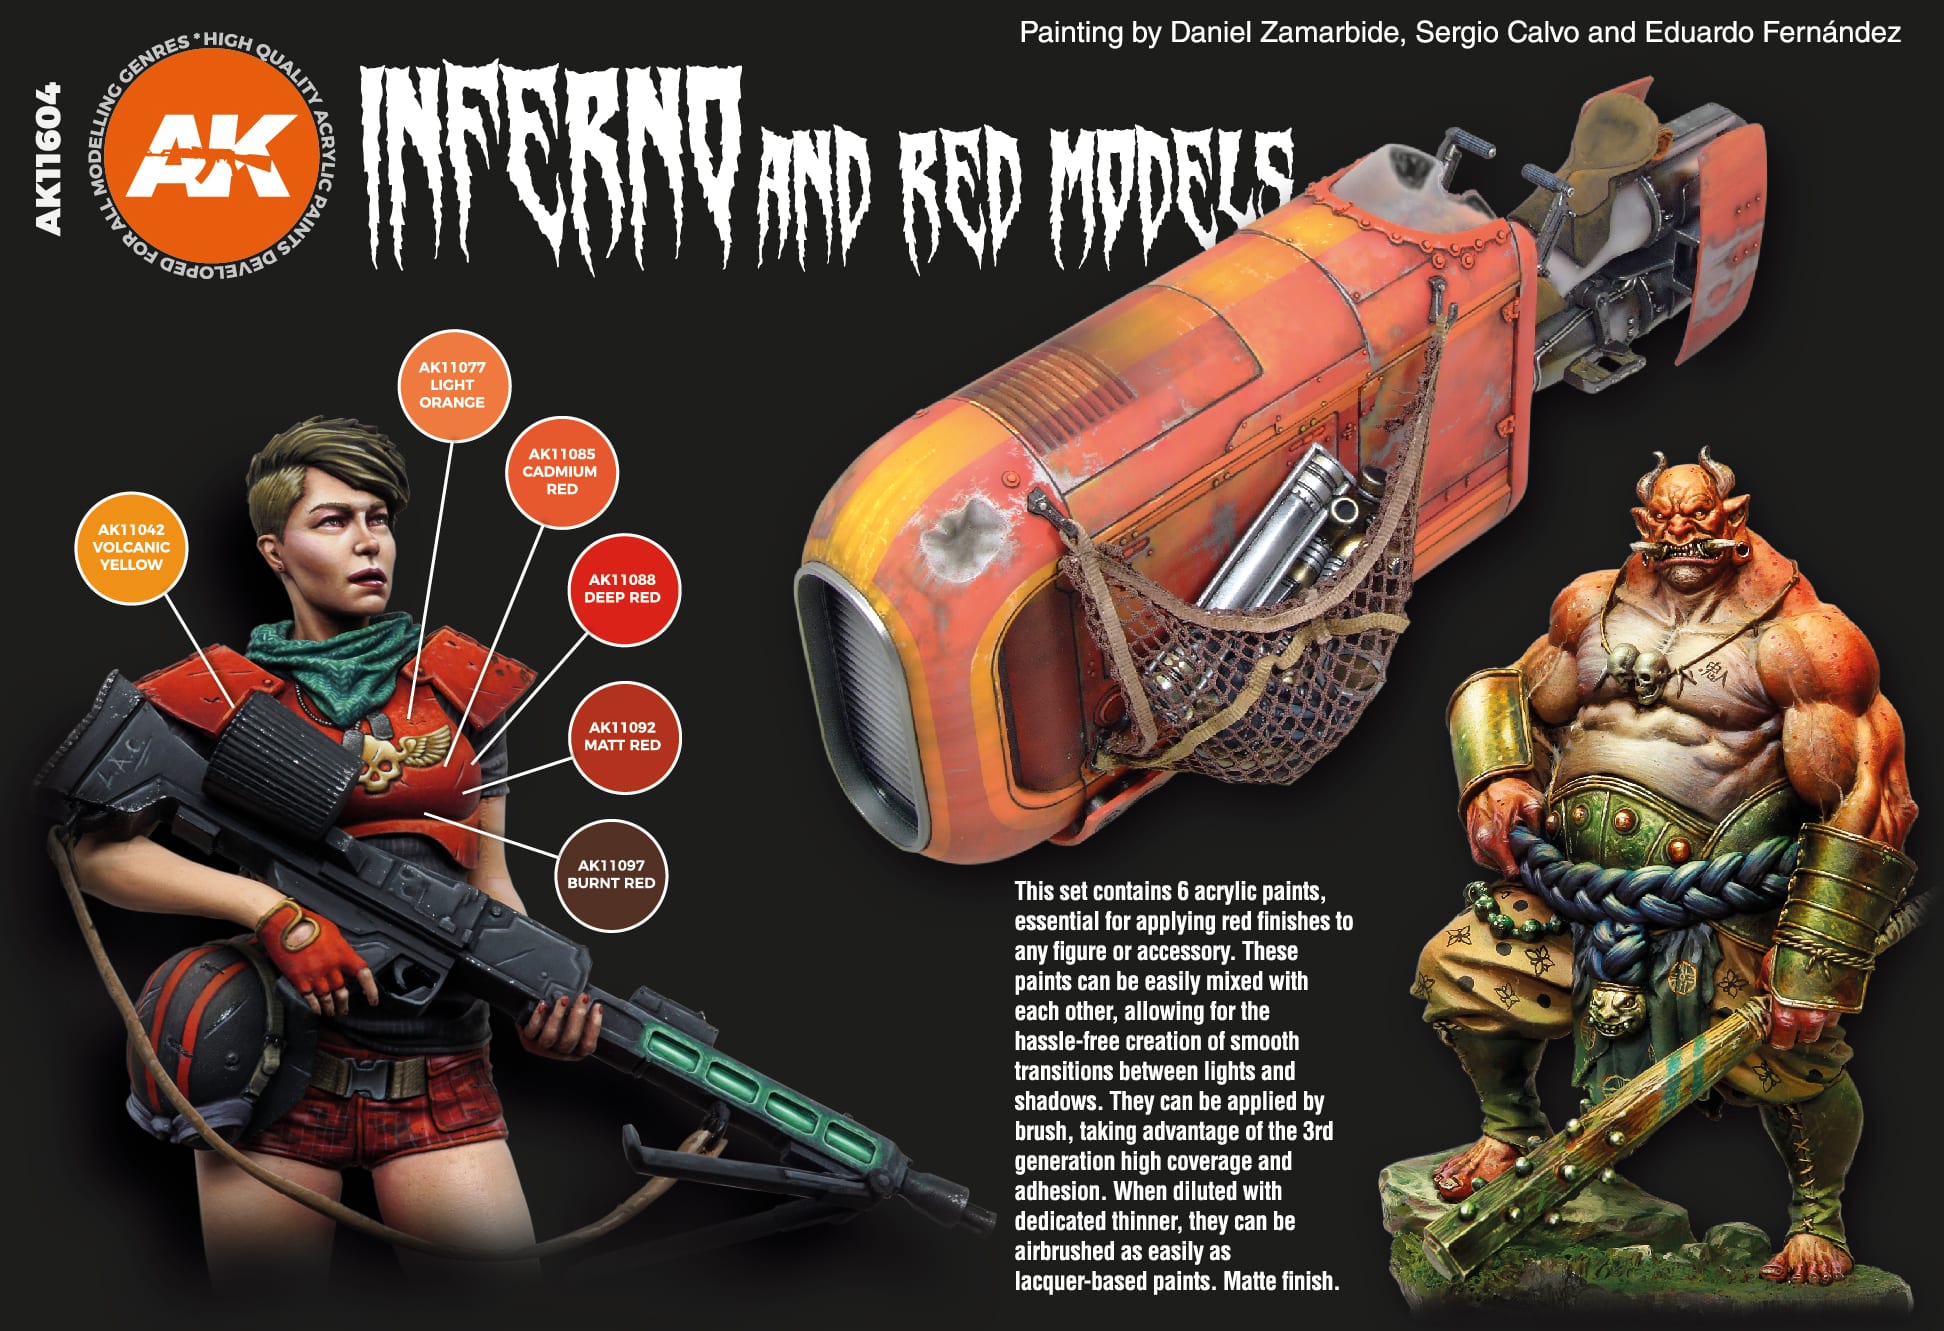 Buy INFERNO AND RED CREATURES online for 16,50€